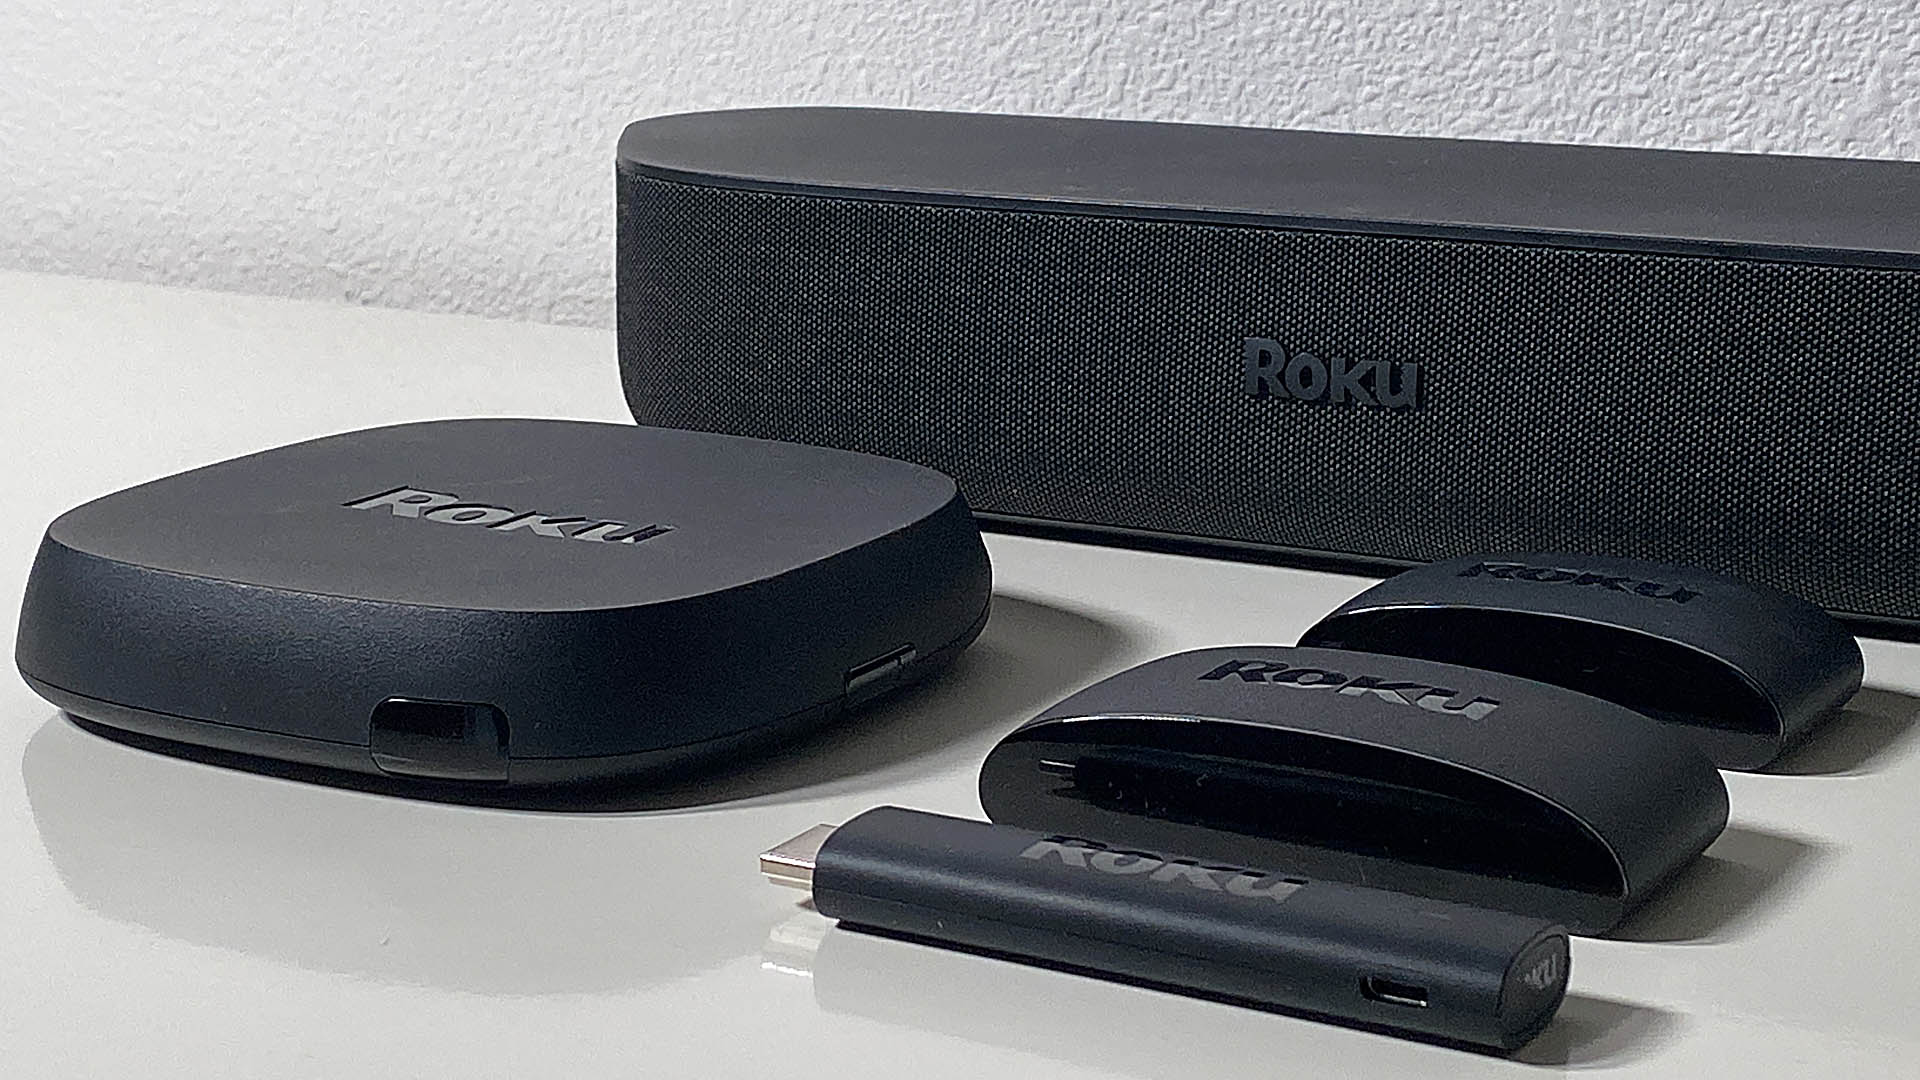 Picking The Right Roku: 5 Current Models Compared